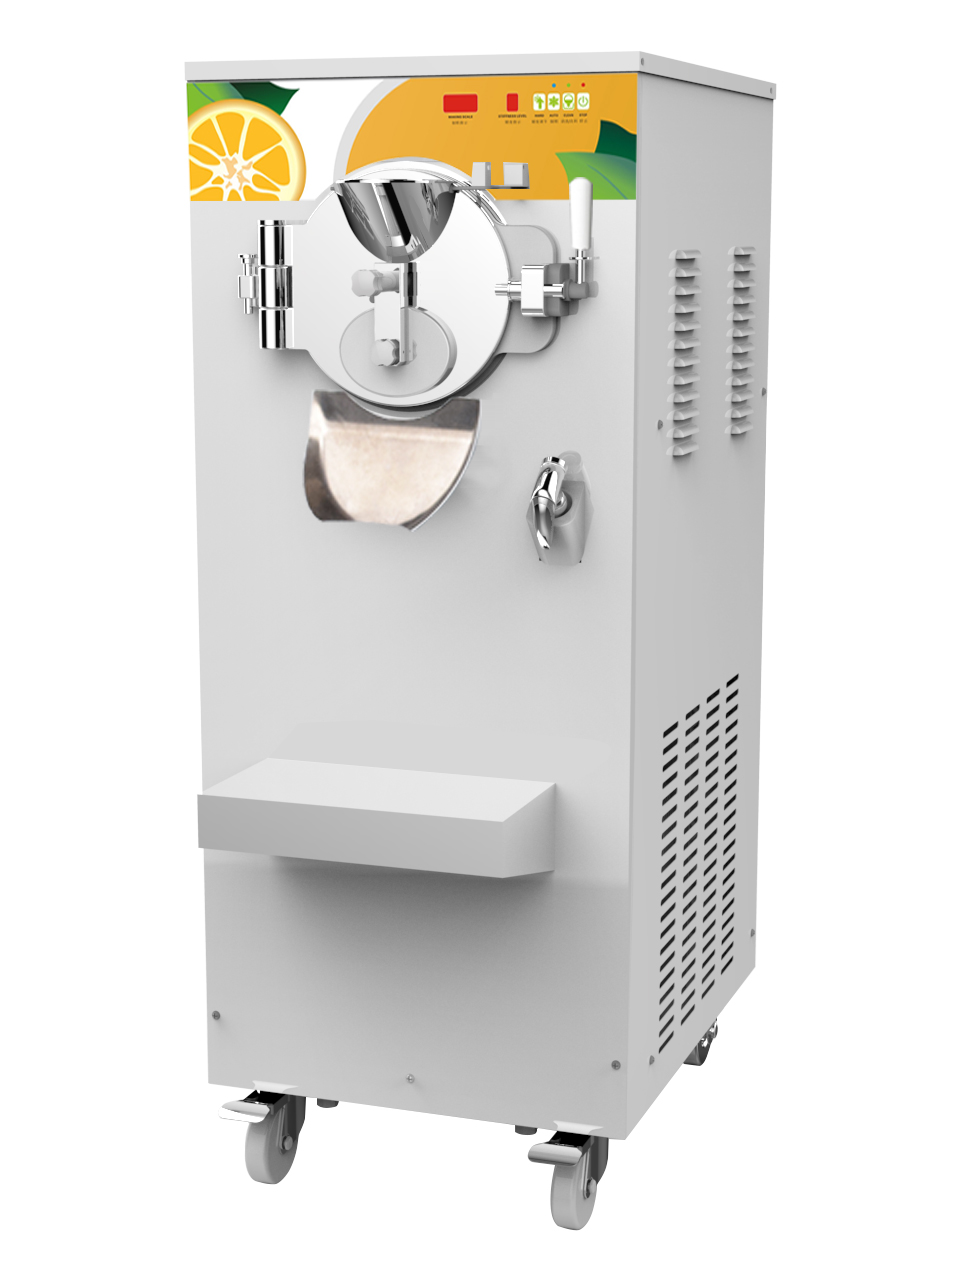 Gelato Machines and Batch Freezers, Specs You Need to Know